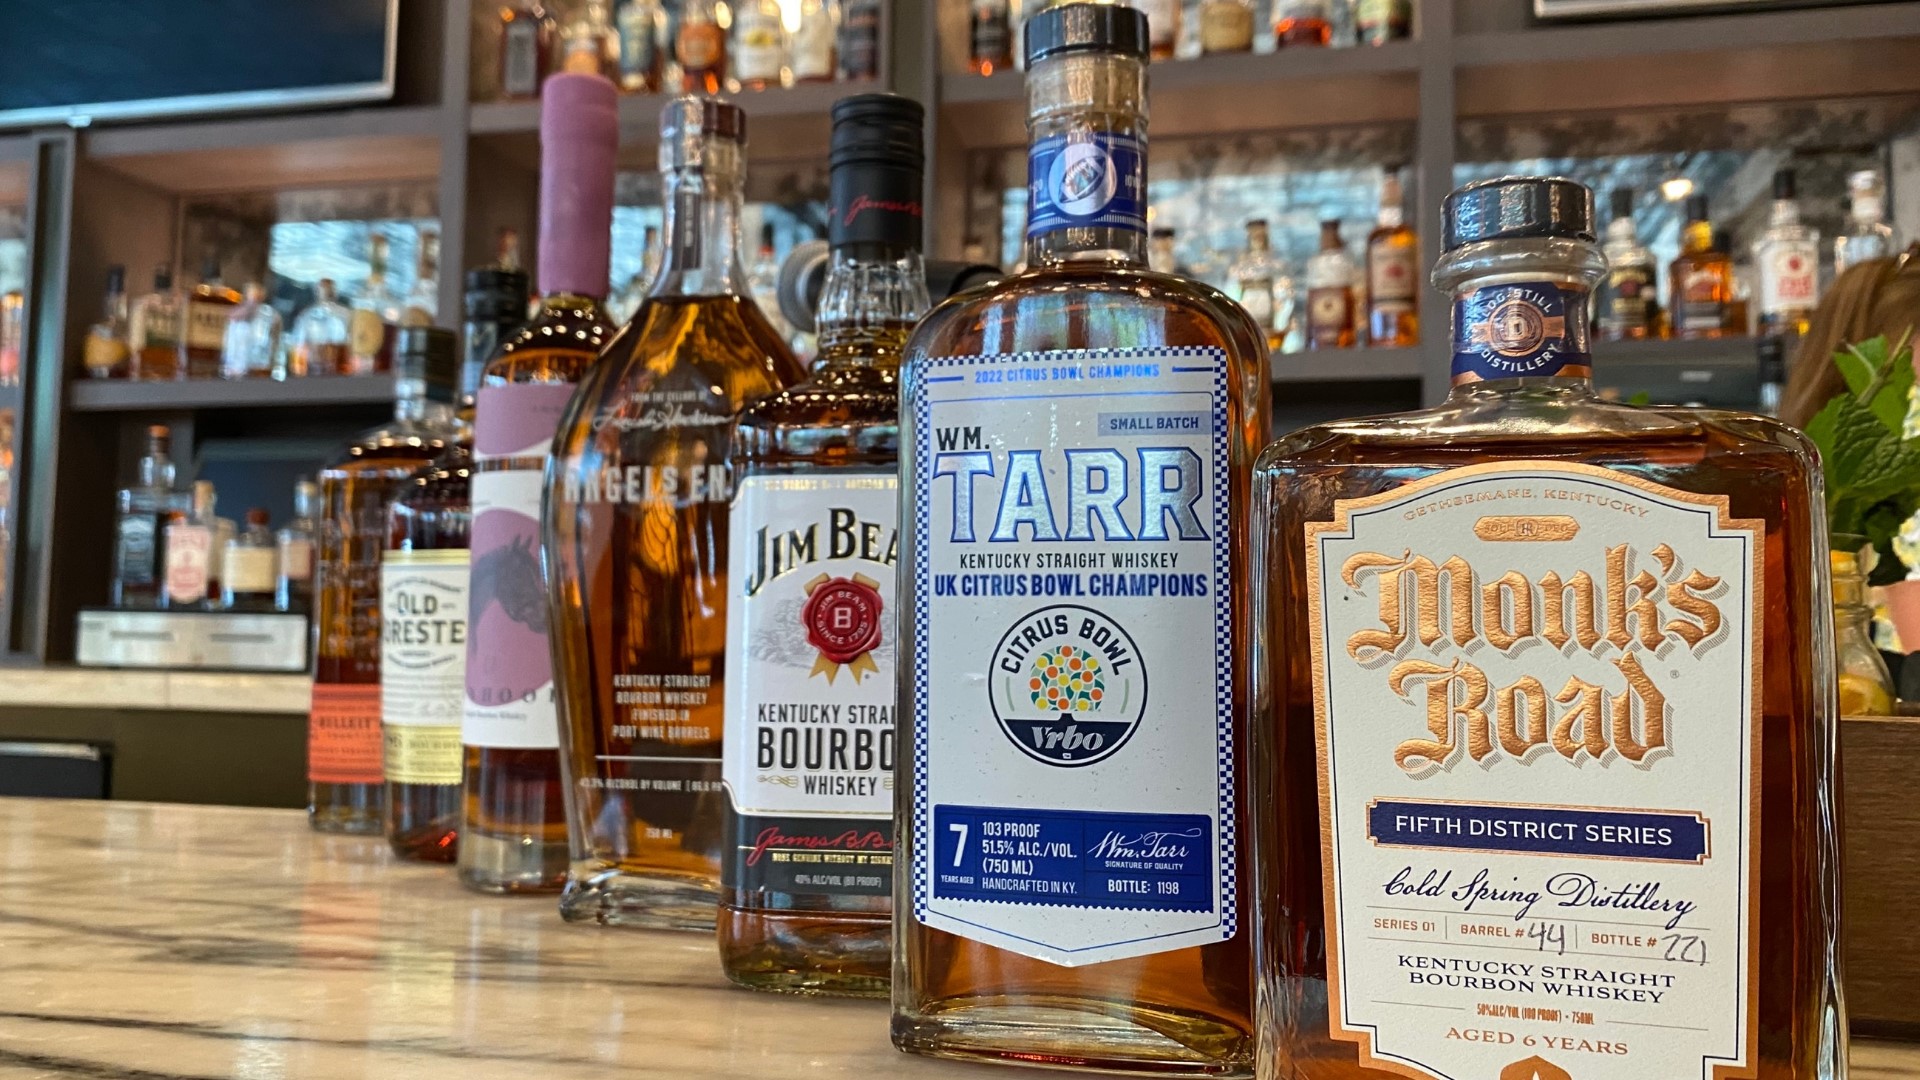 The goal is to find the perfect cocktail infused with Kentucky's famous bourbon.